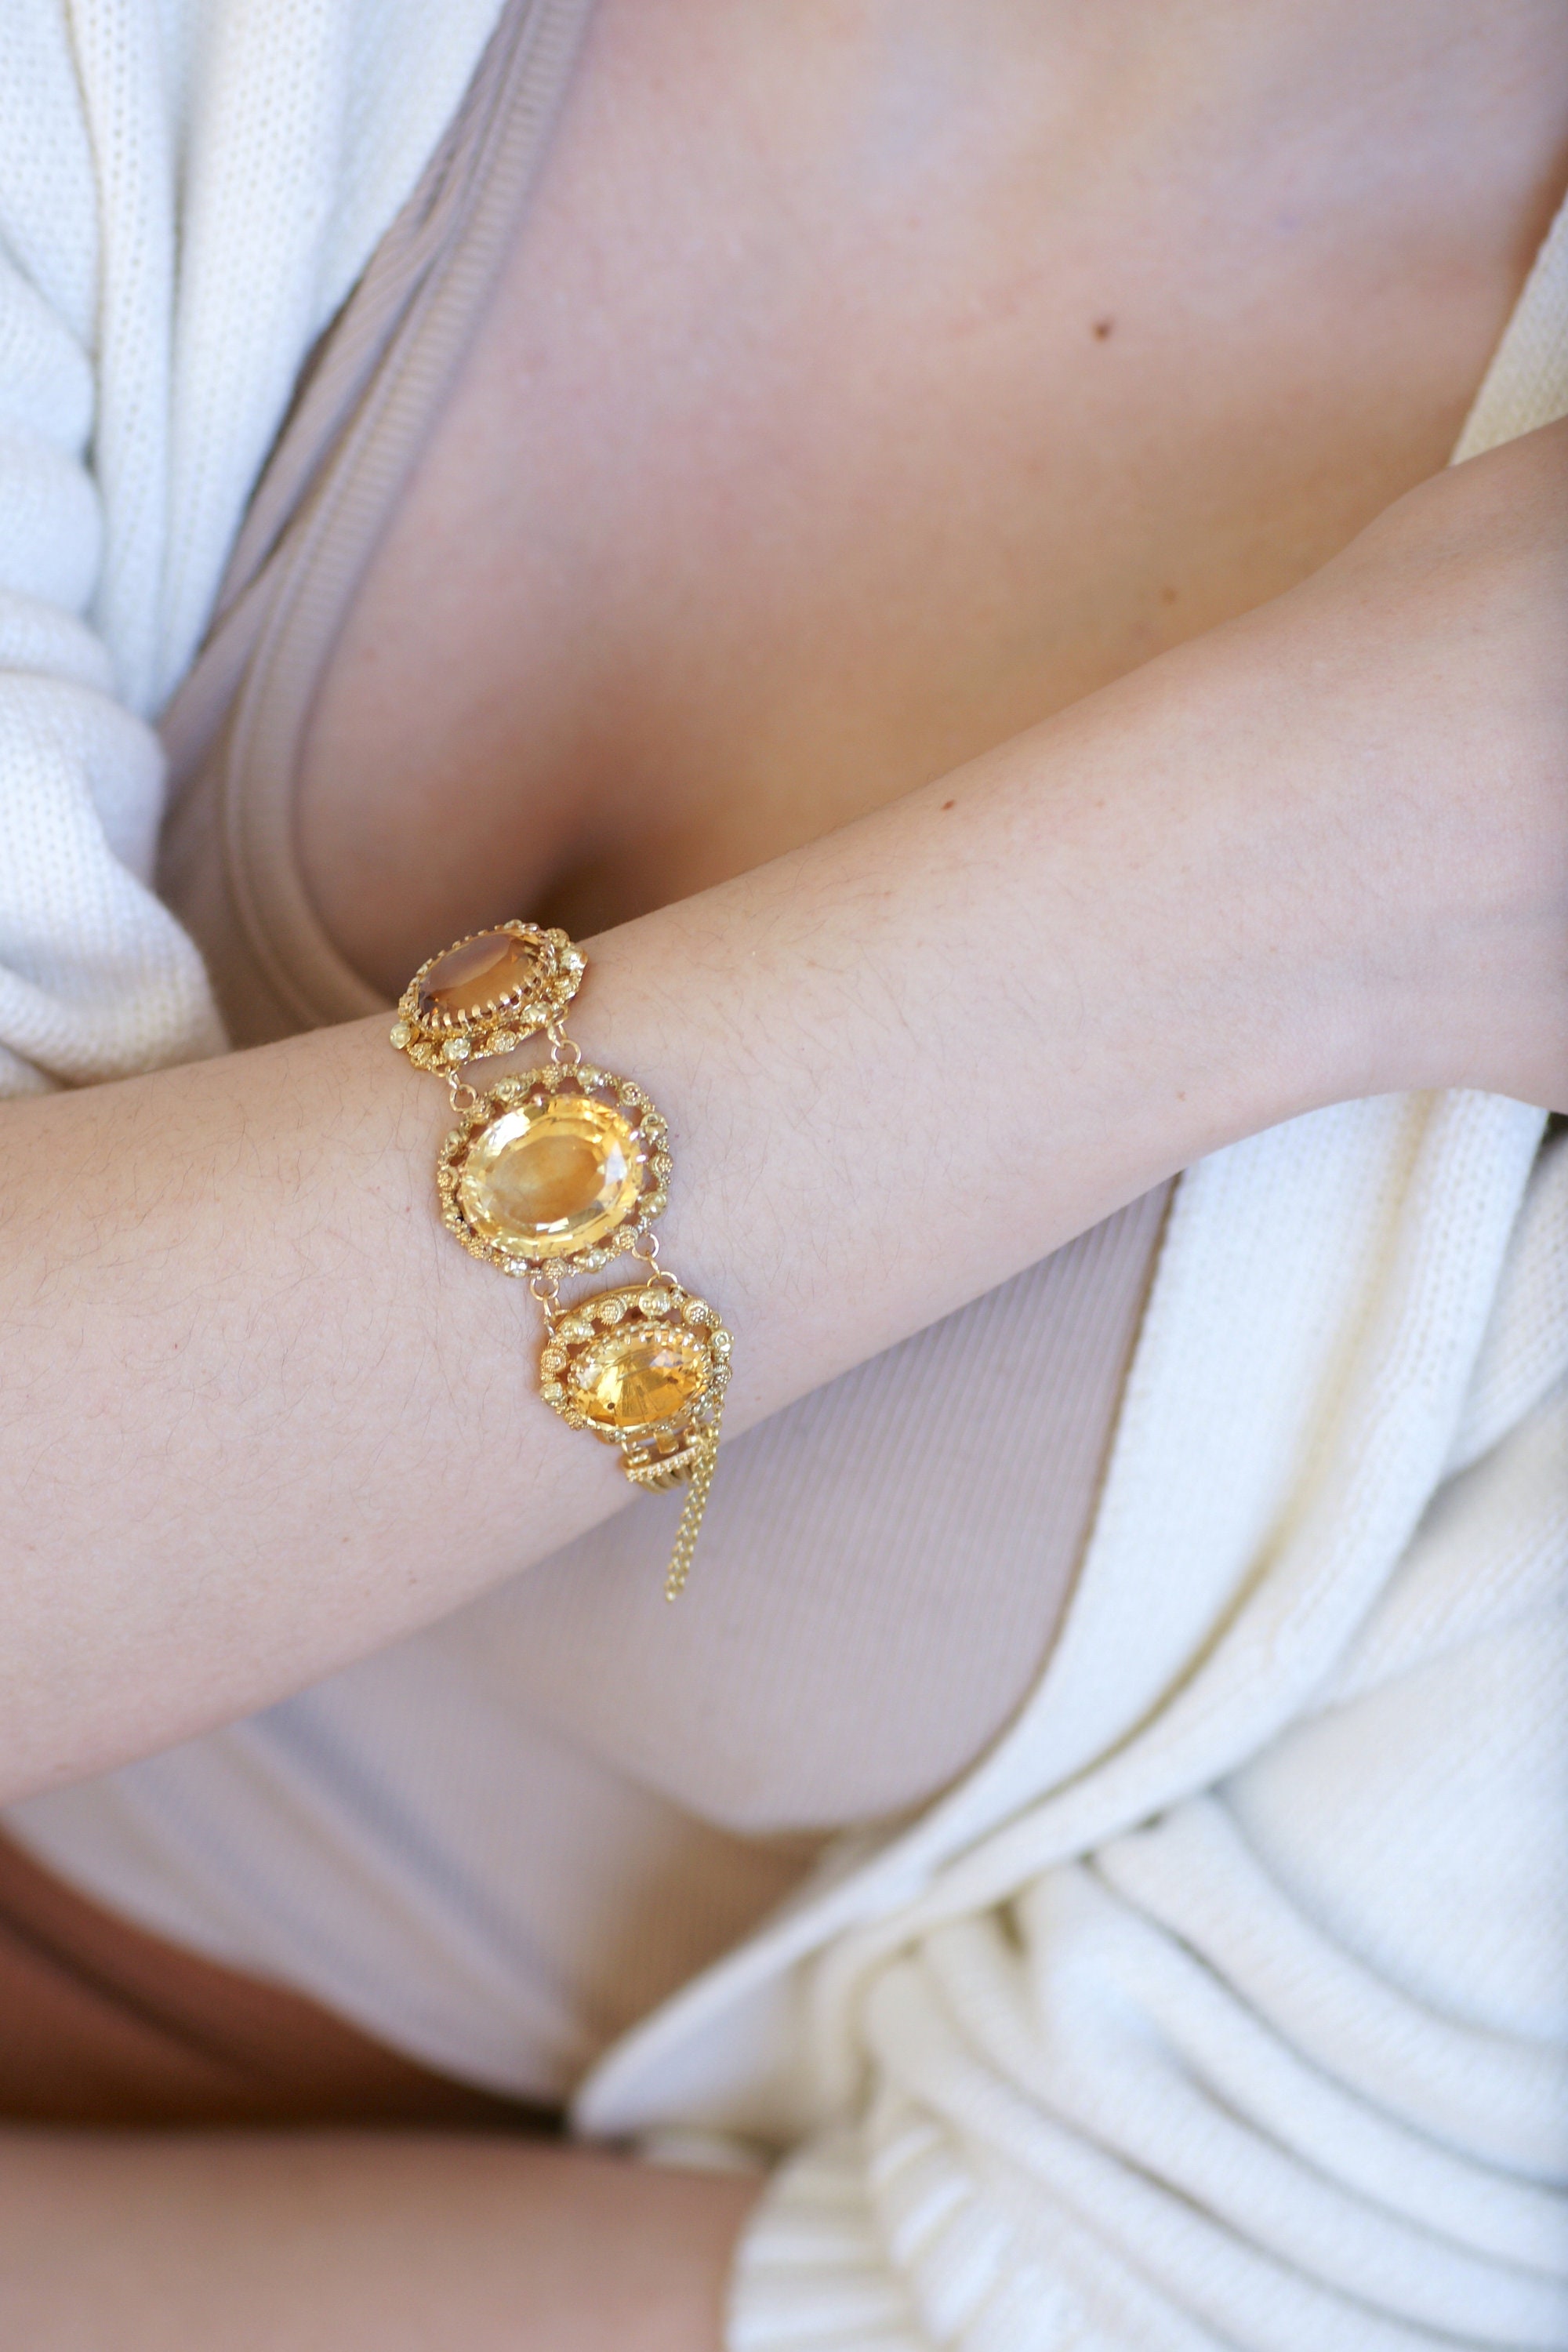 Charles X gold and citrine cuff bracelet